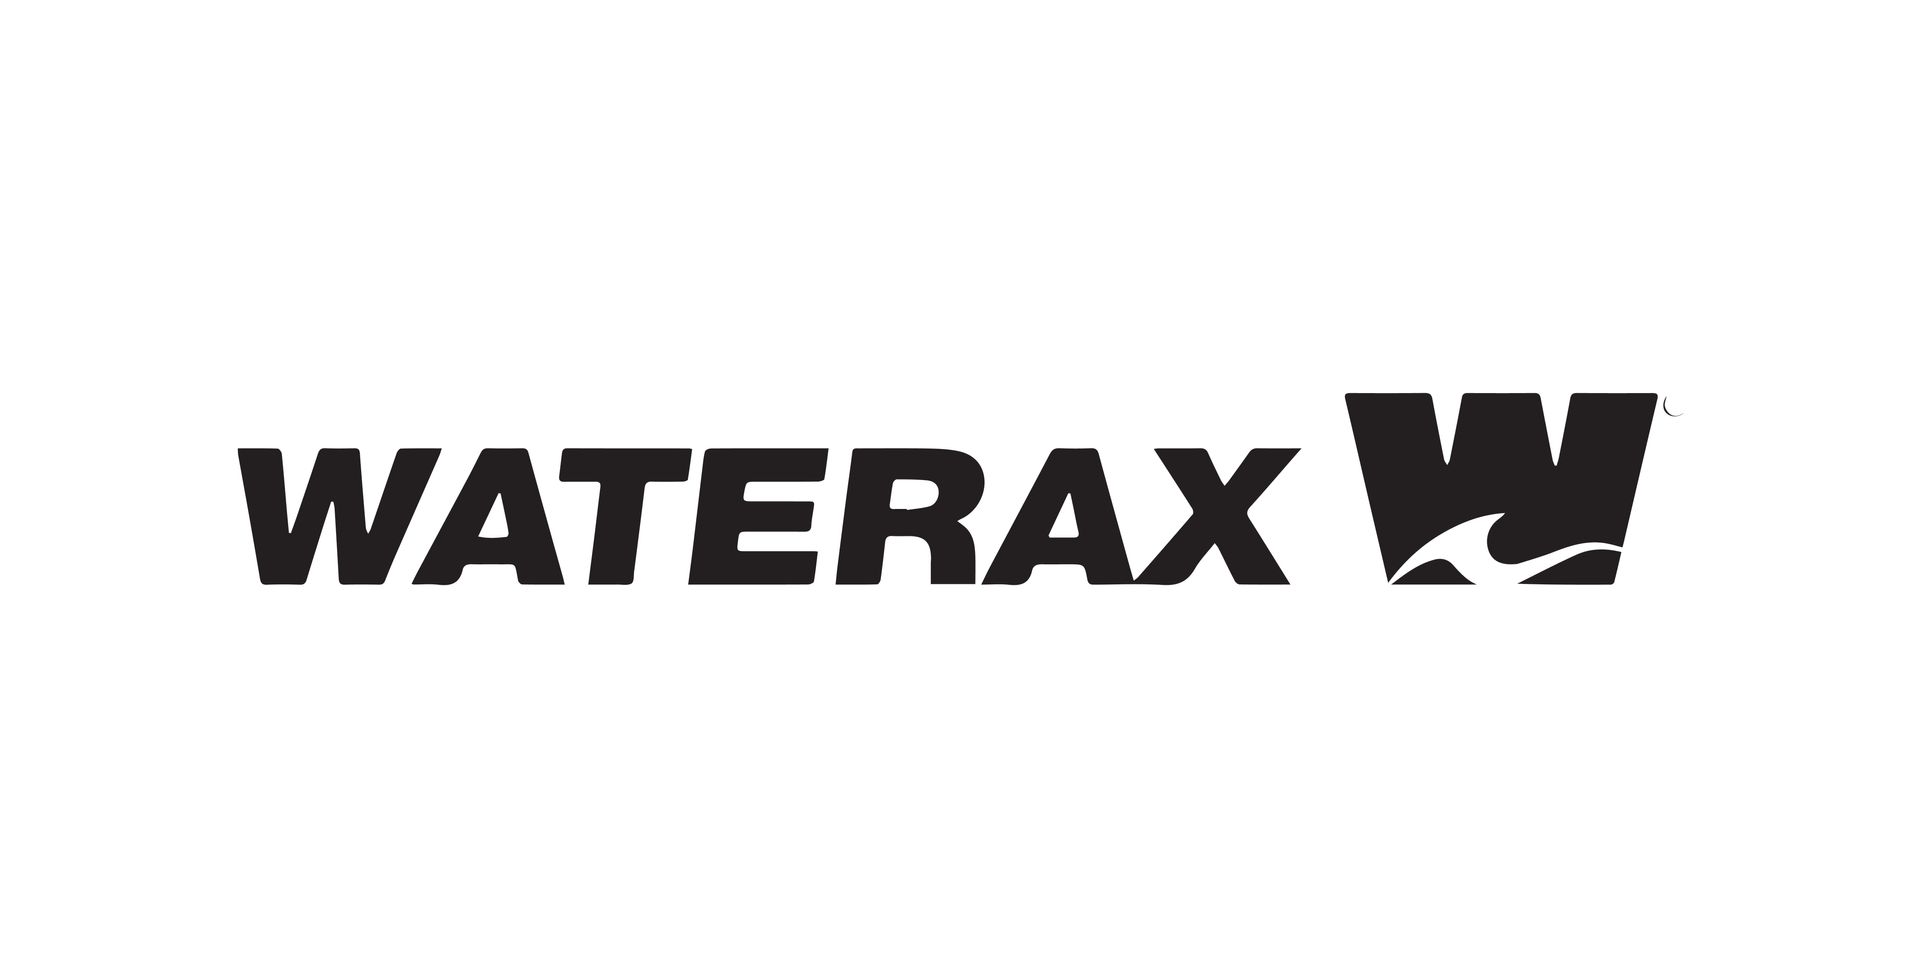 A black and white logo for waterax w on a white background.